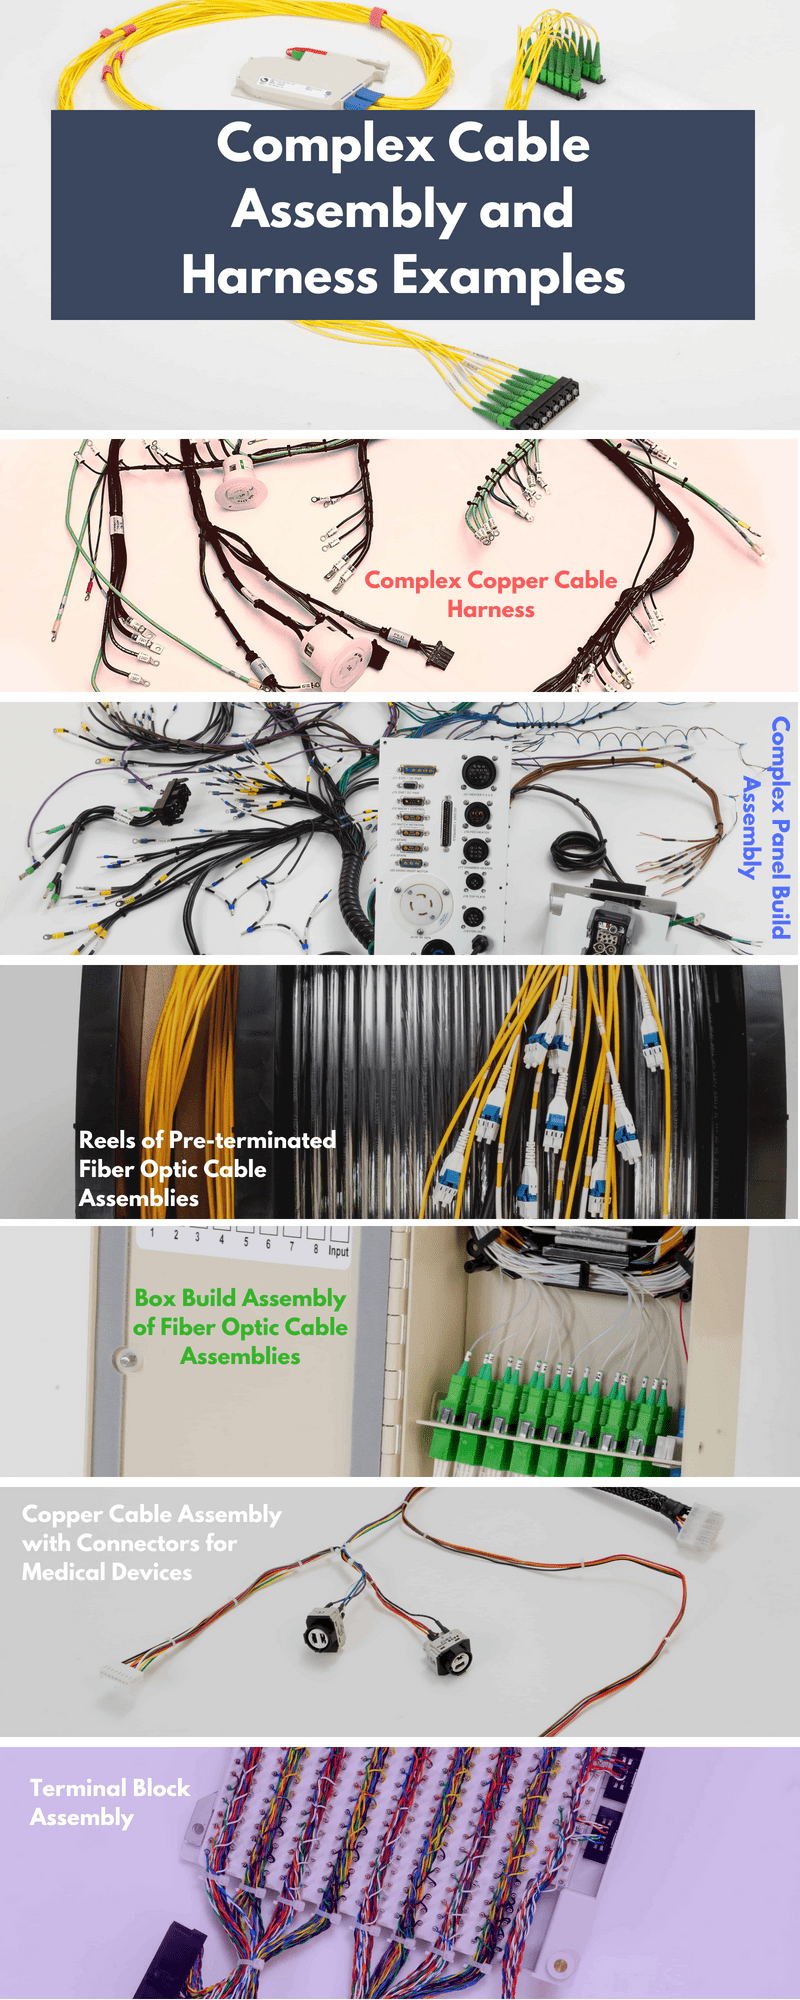 Custom Cable Harnesses and Assemblies